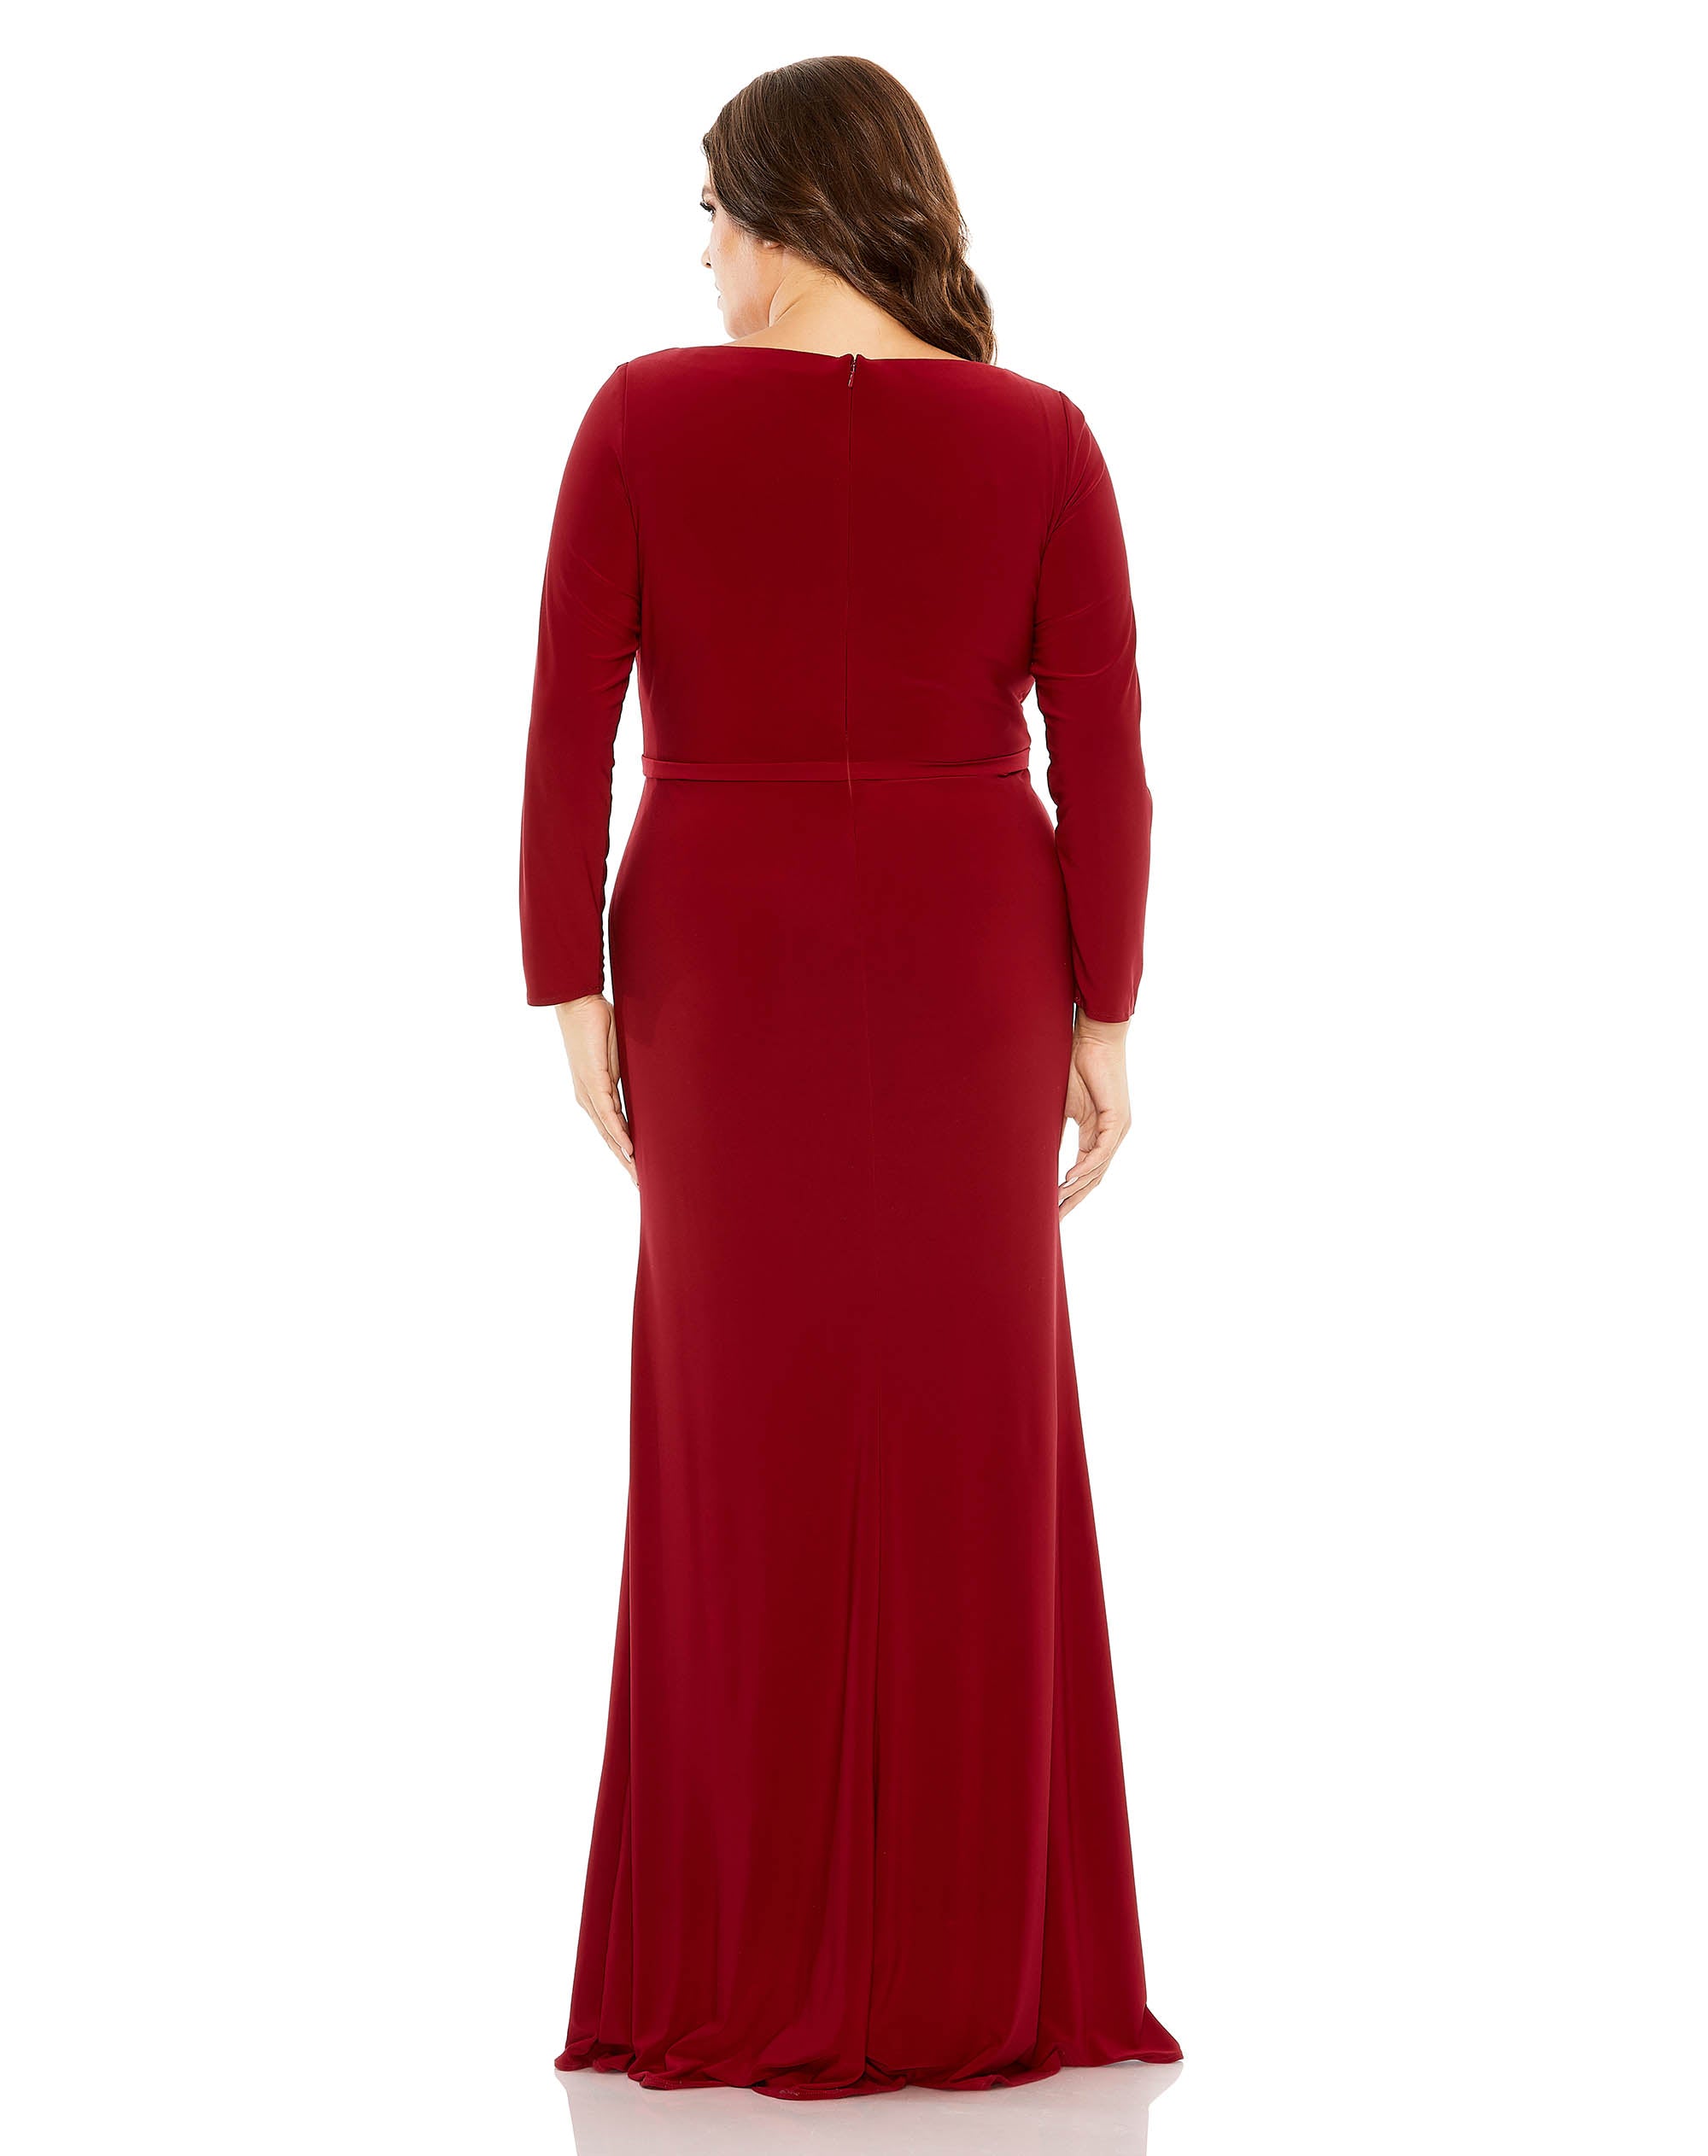 Long Sleeve V-Neck Faux Wrap Gown